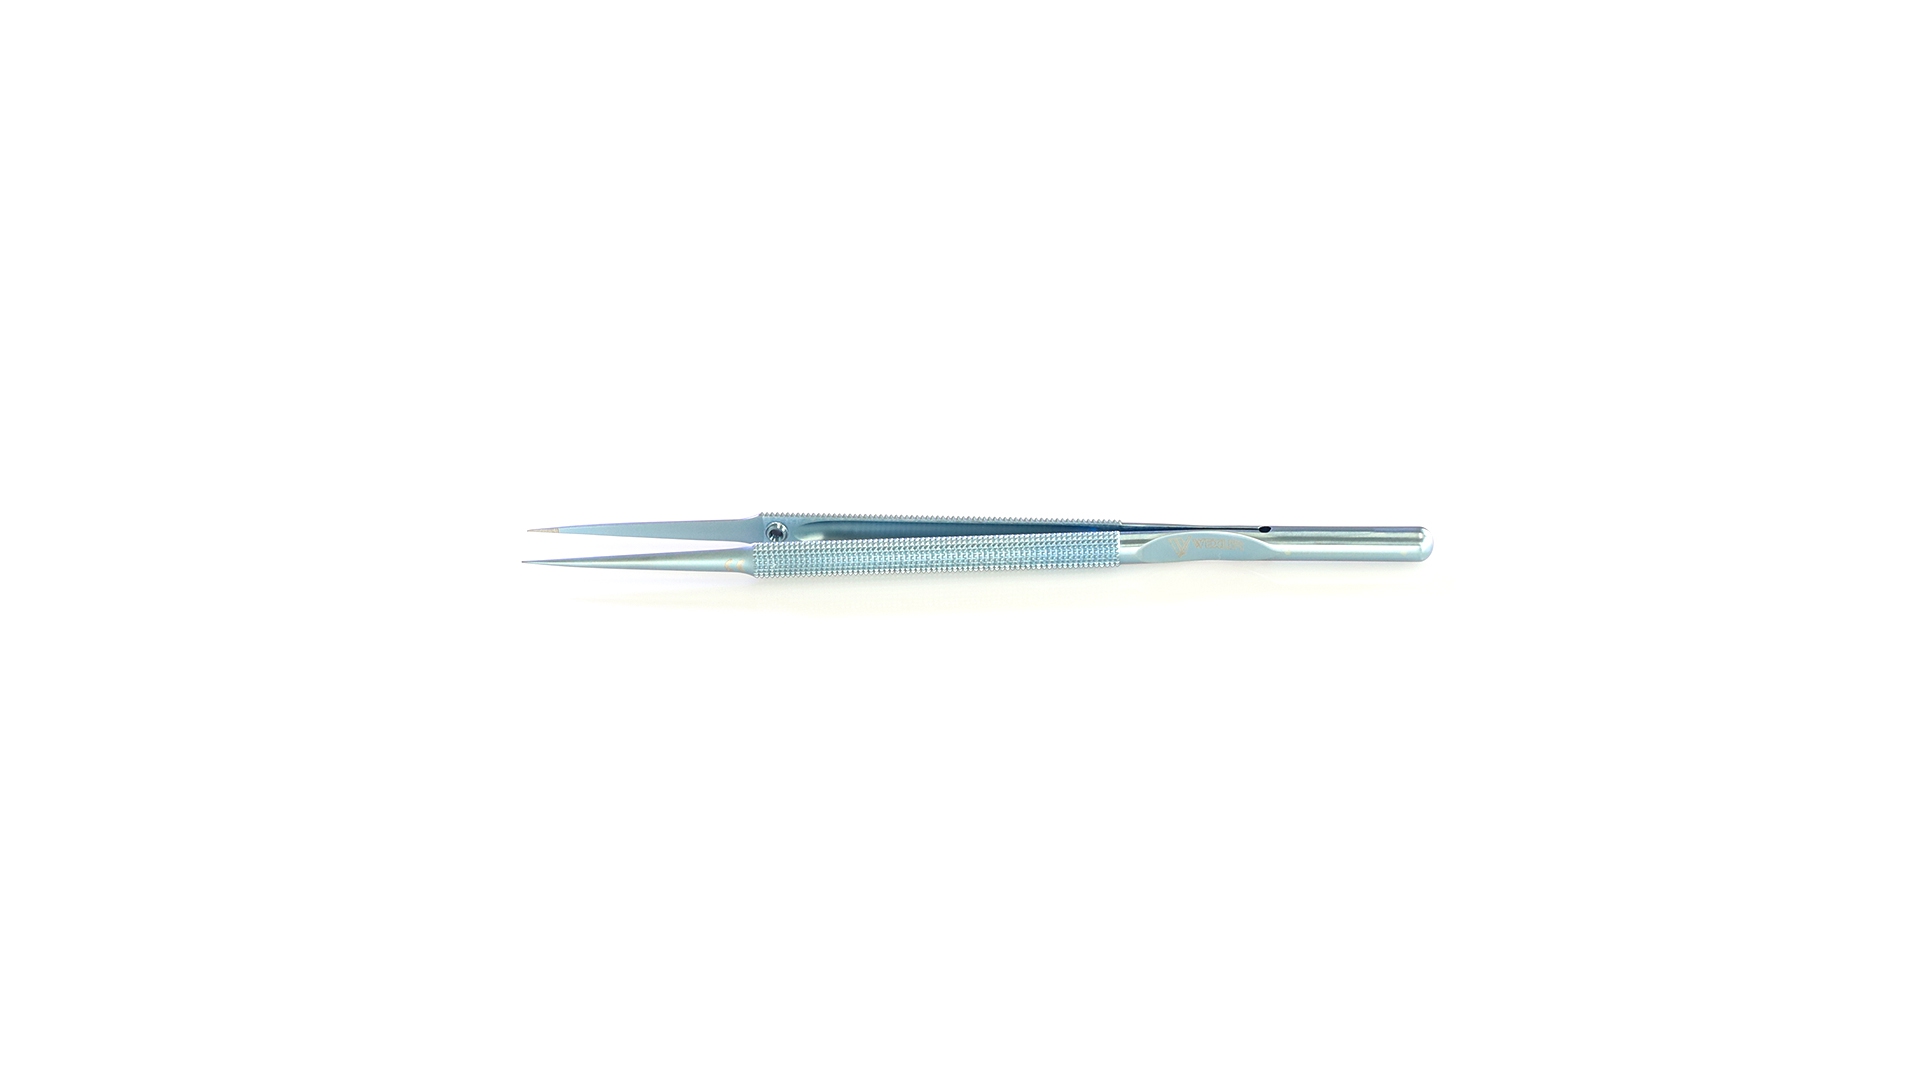 Micro Forceps - Straight TC coated 0.4mm tips